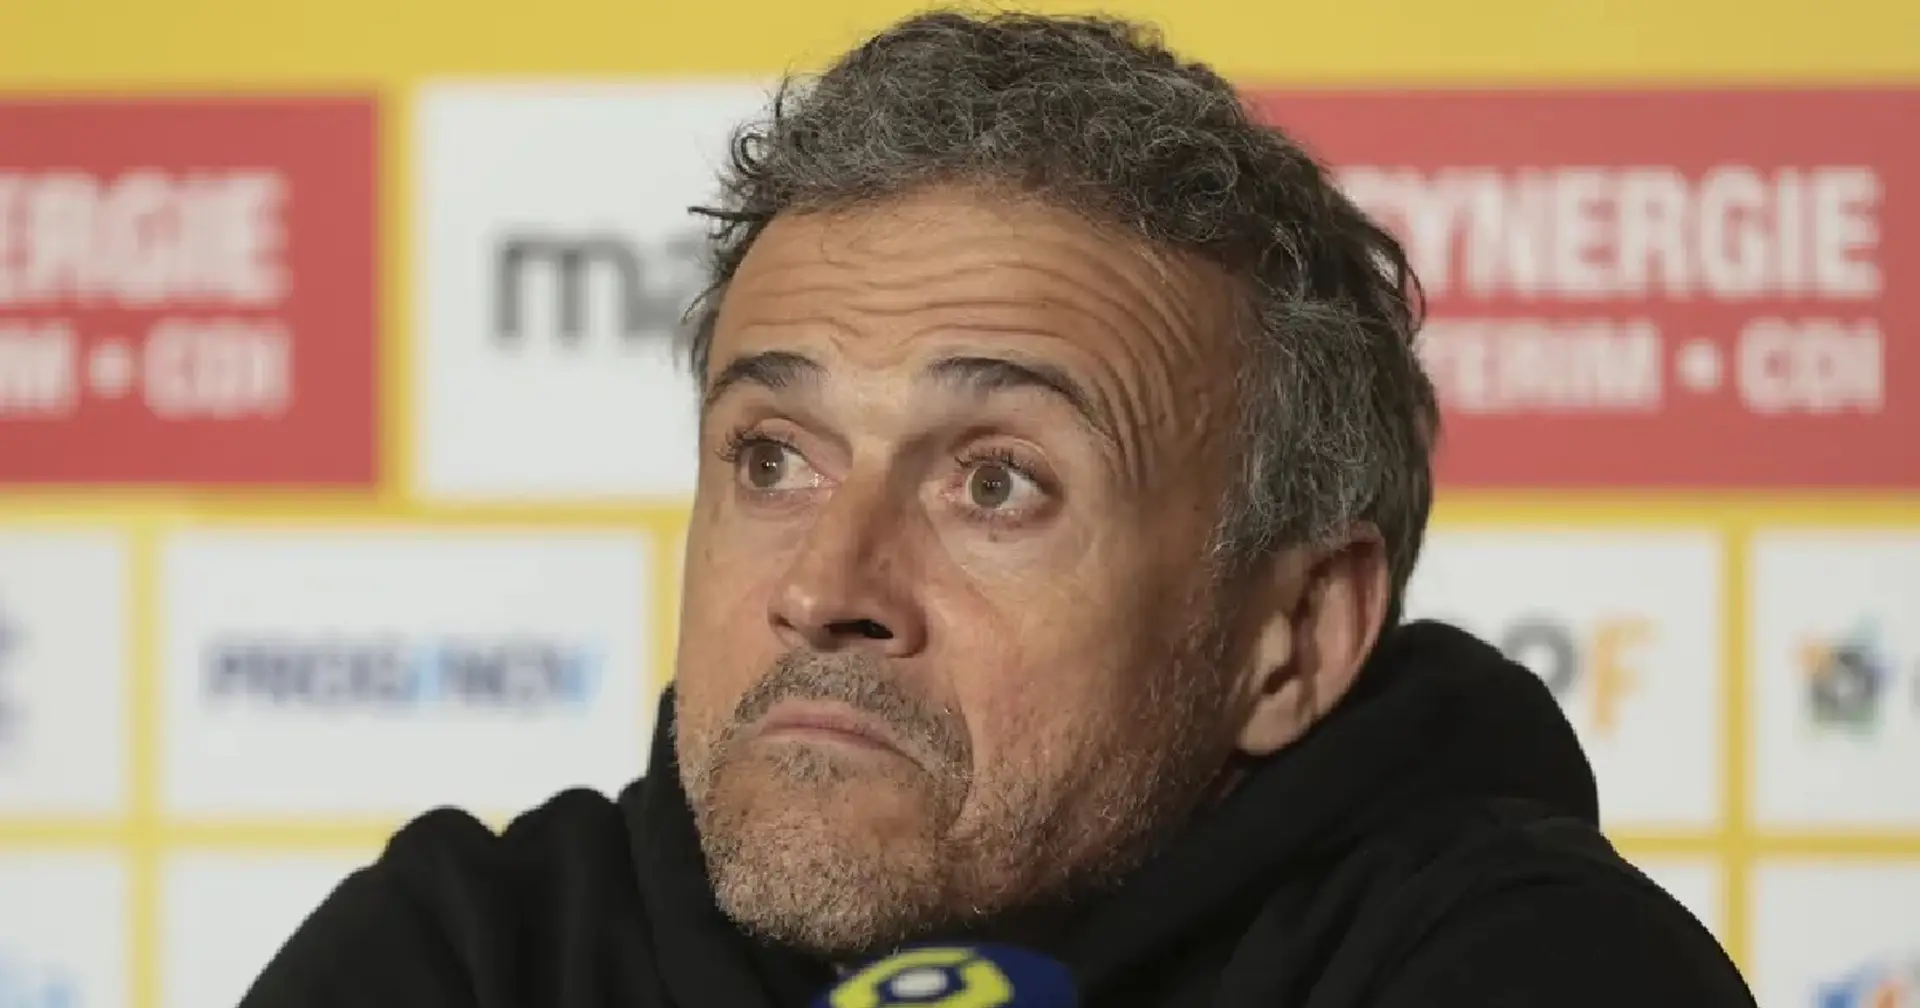 Luis Enrique clears air on PSG future amid rumours of Barca return